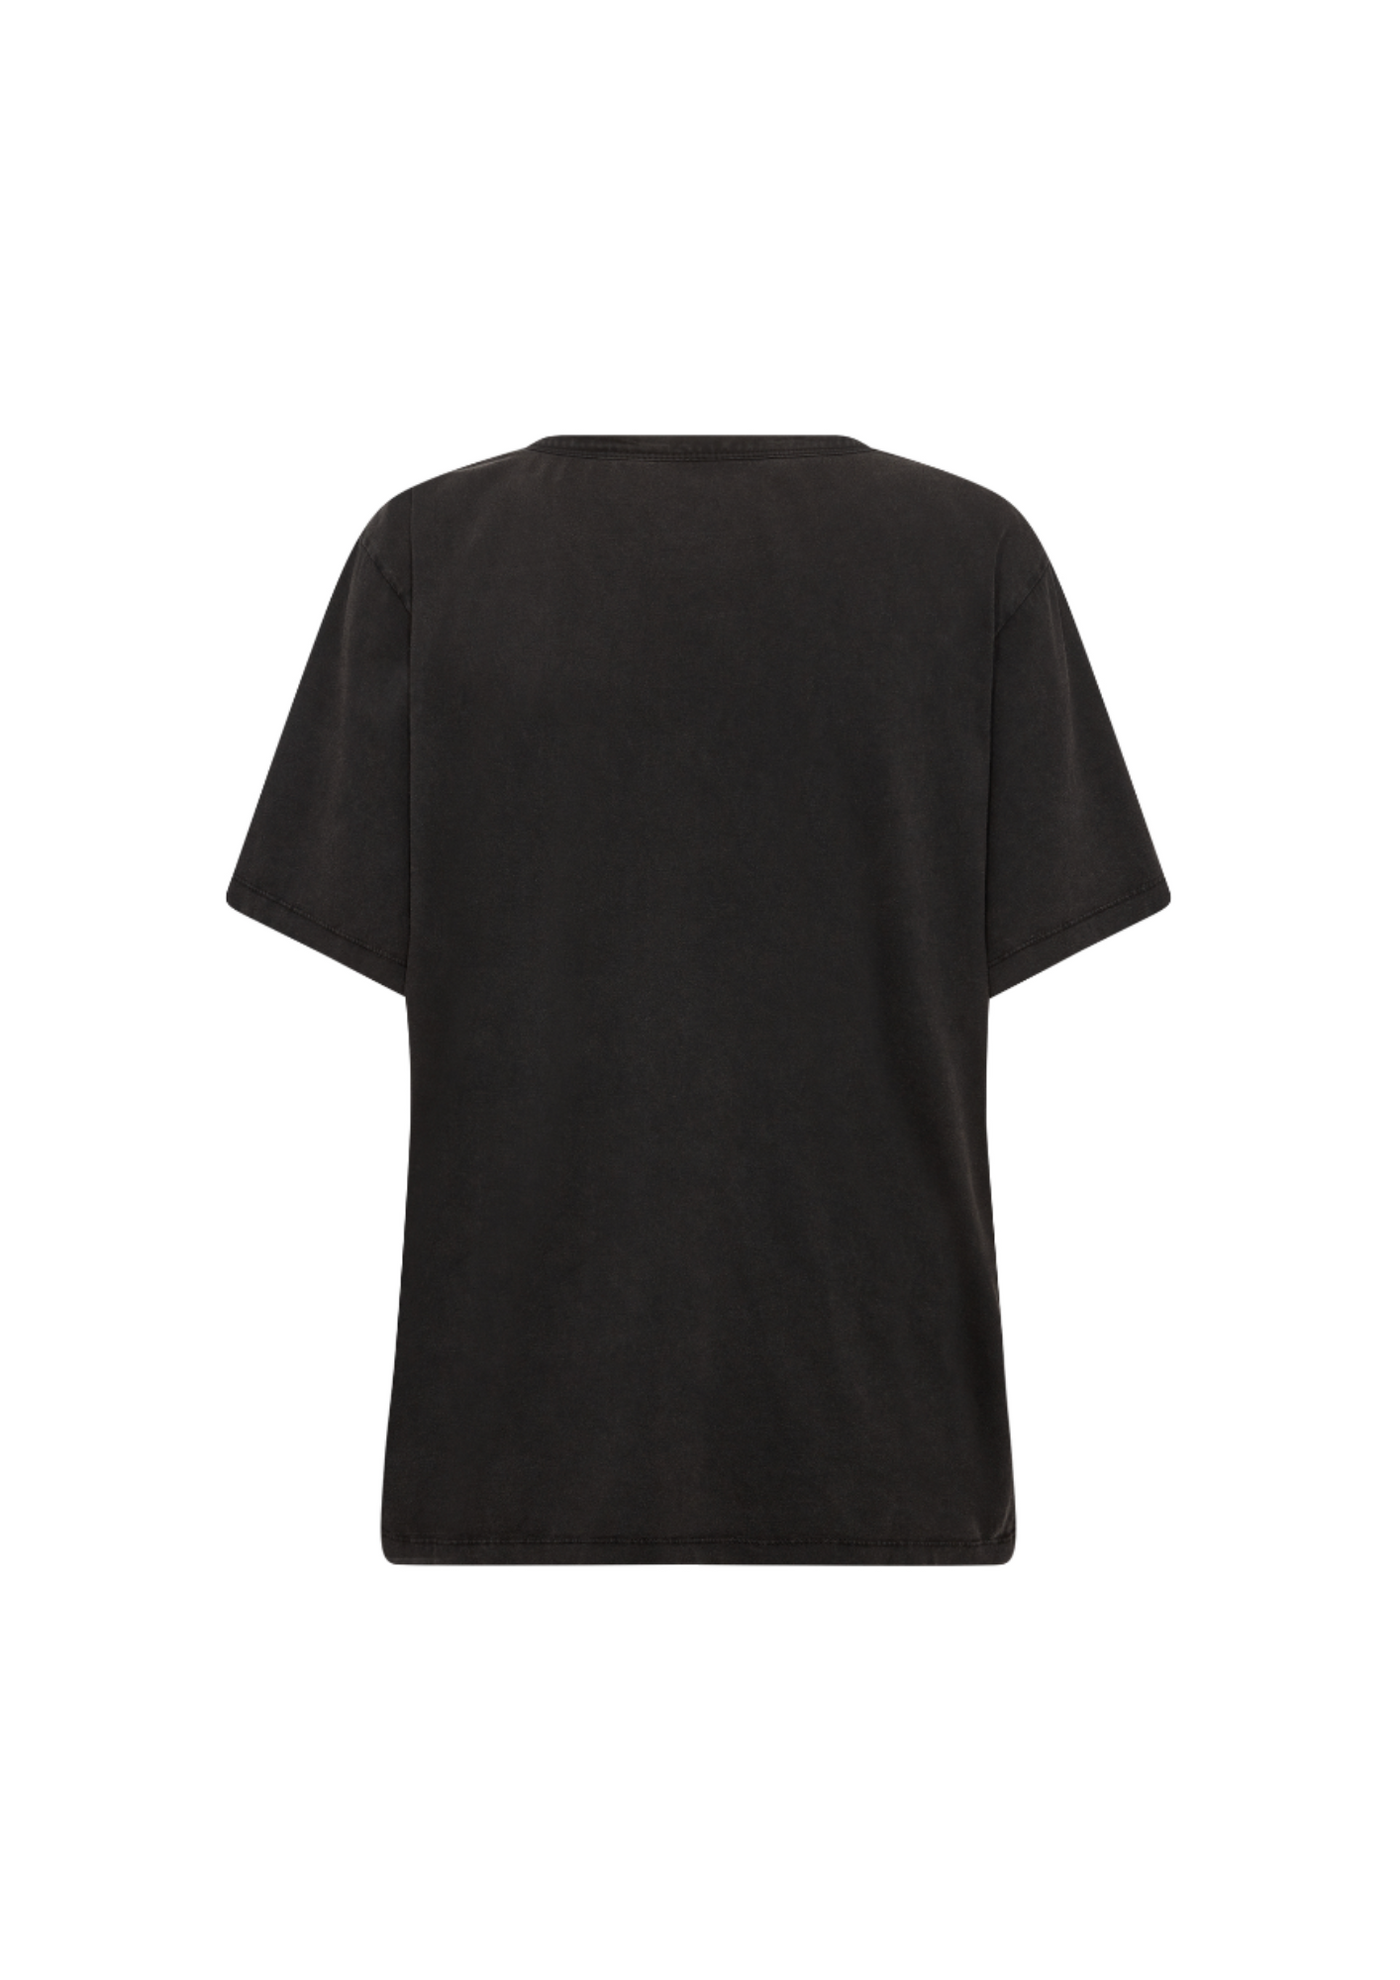 Co' Couture | AcidCC Outline Oversize Tee Black